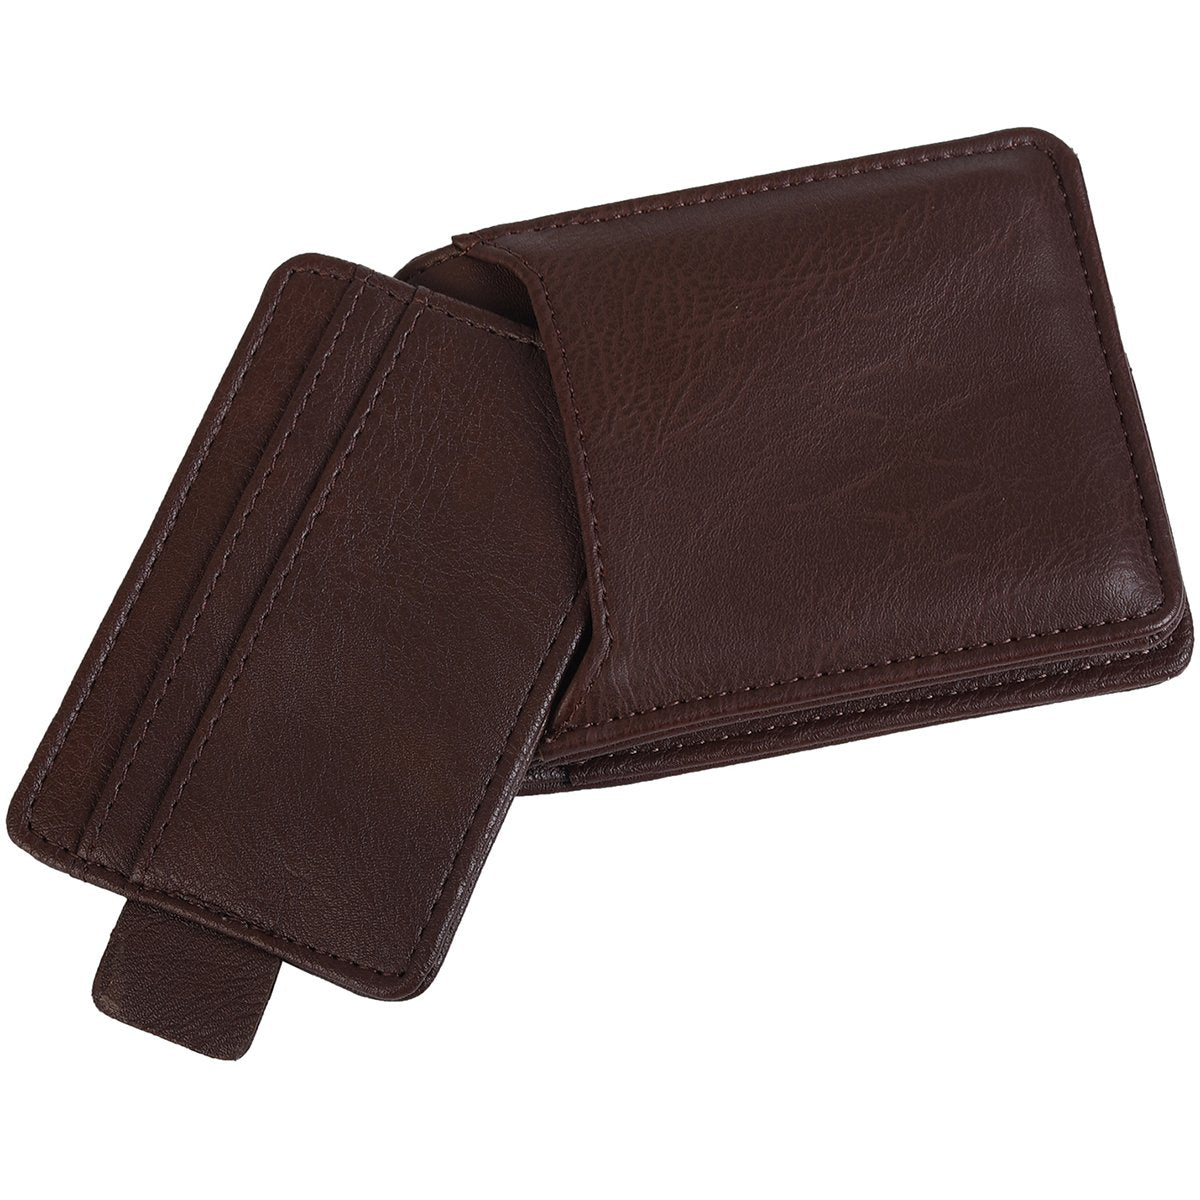 Leather Dual Wallet - Nicole Brayden Gifts